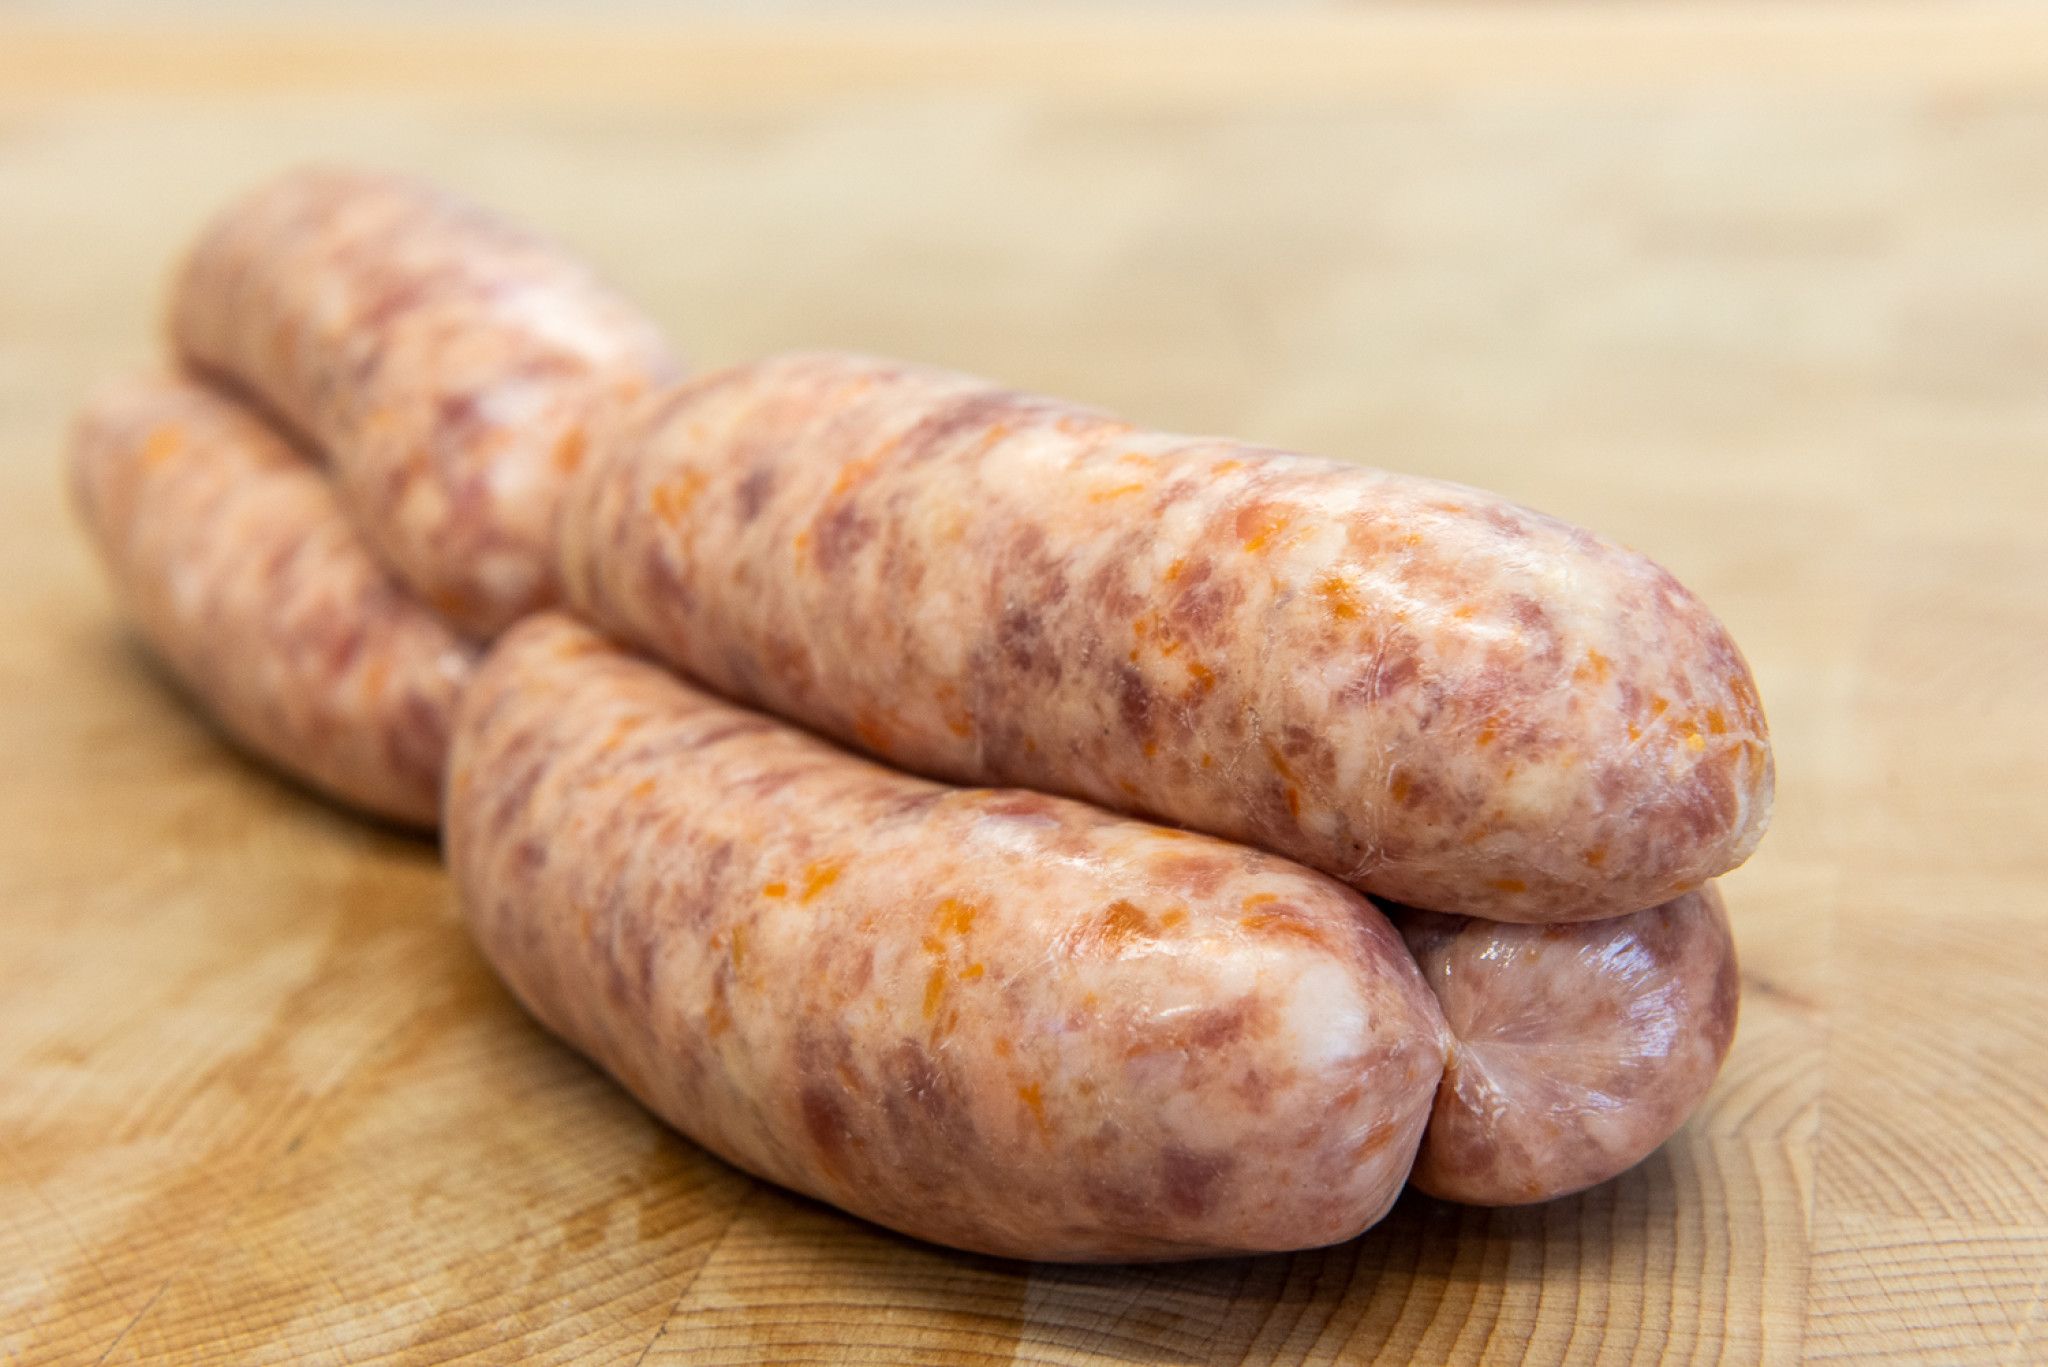 Turkey Sausages From Intwood Farm